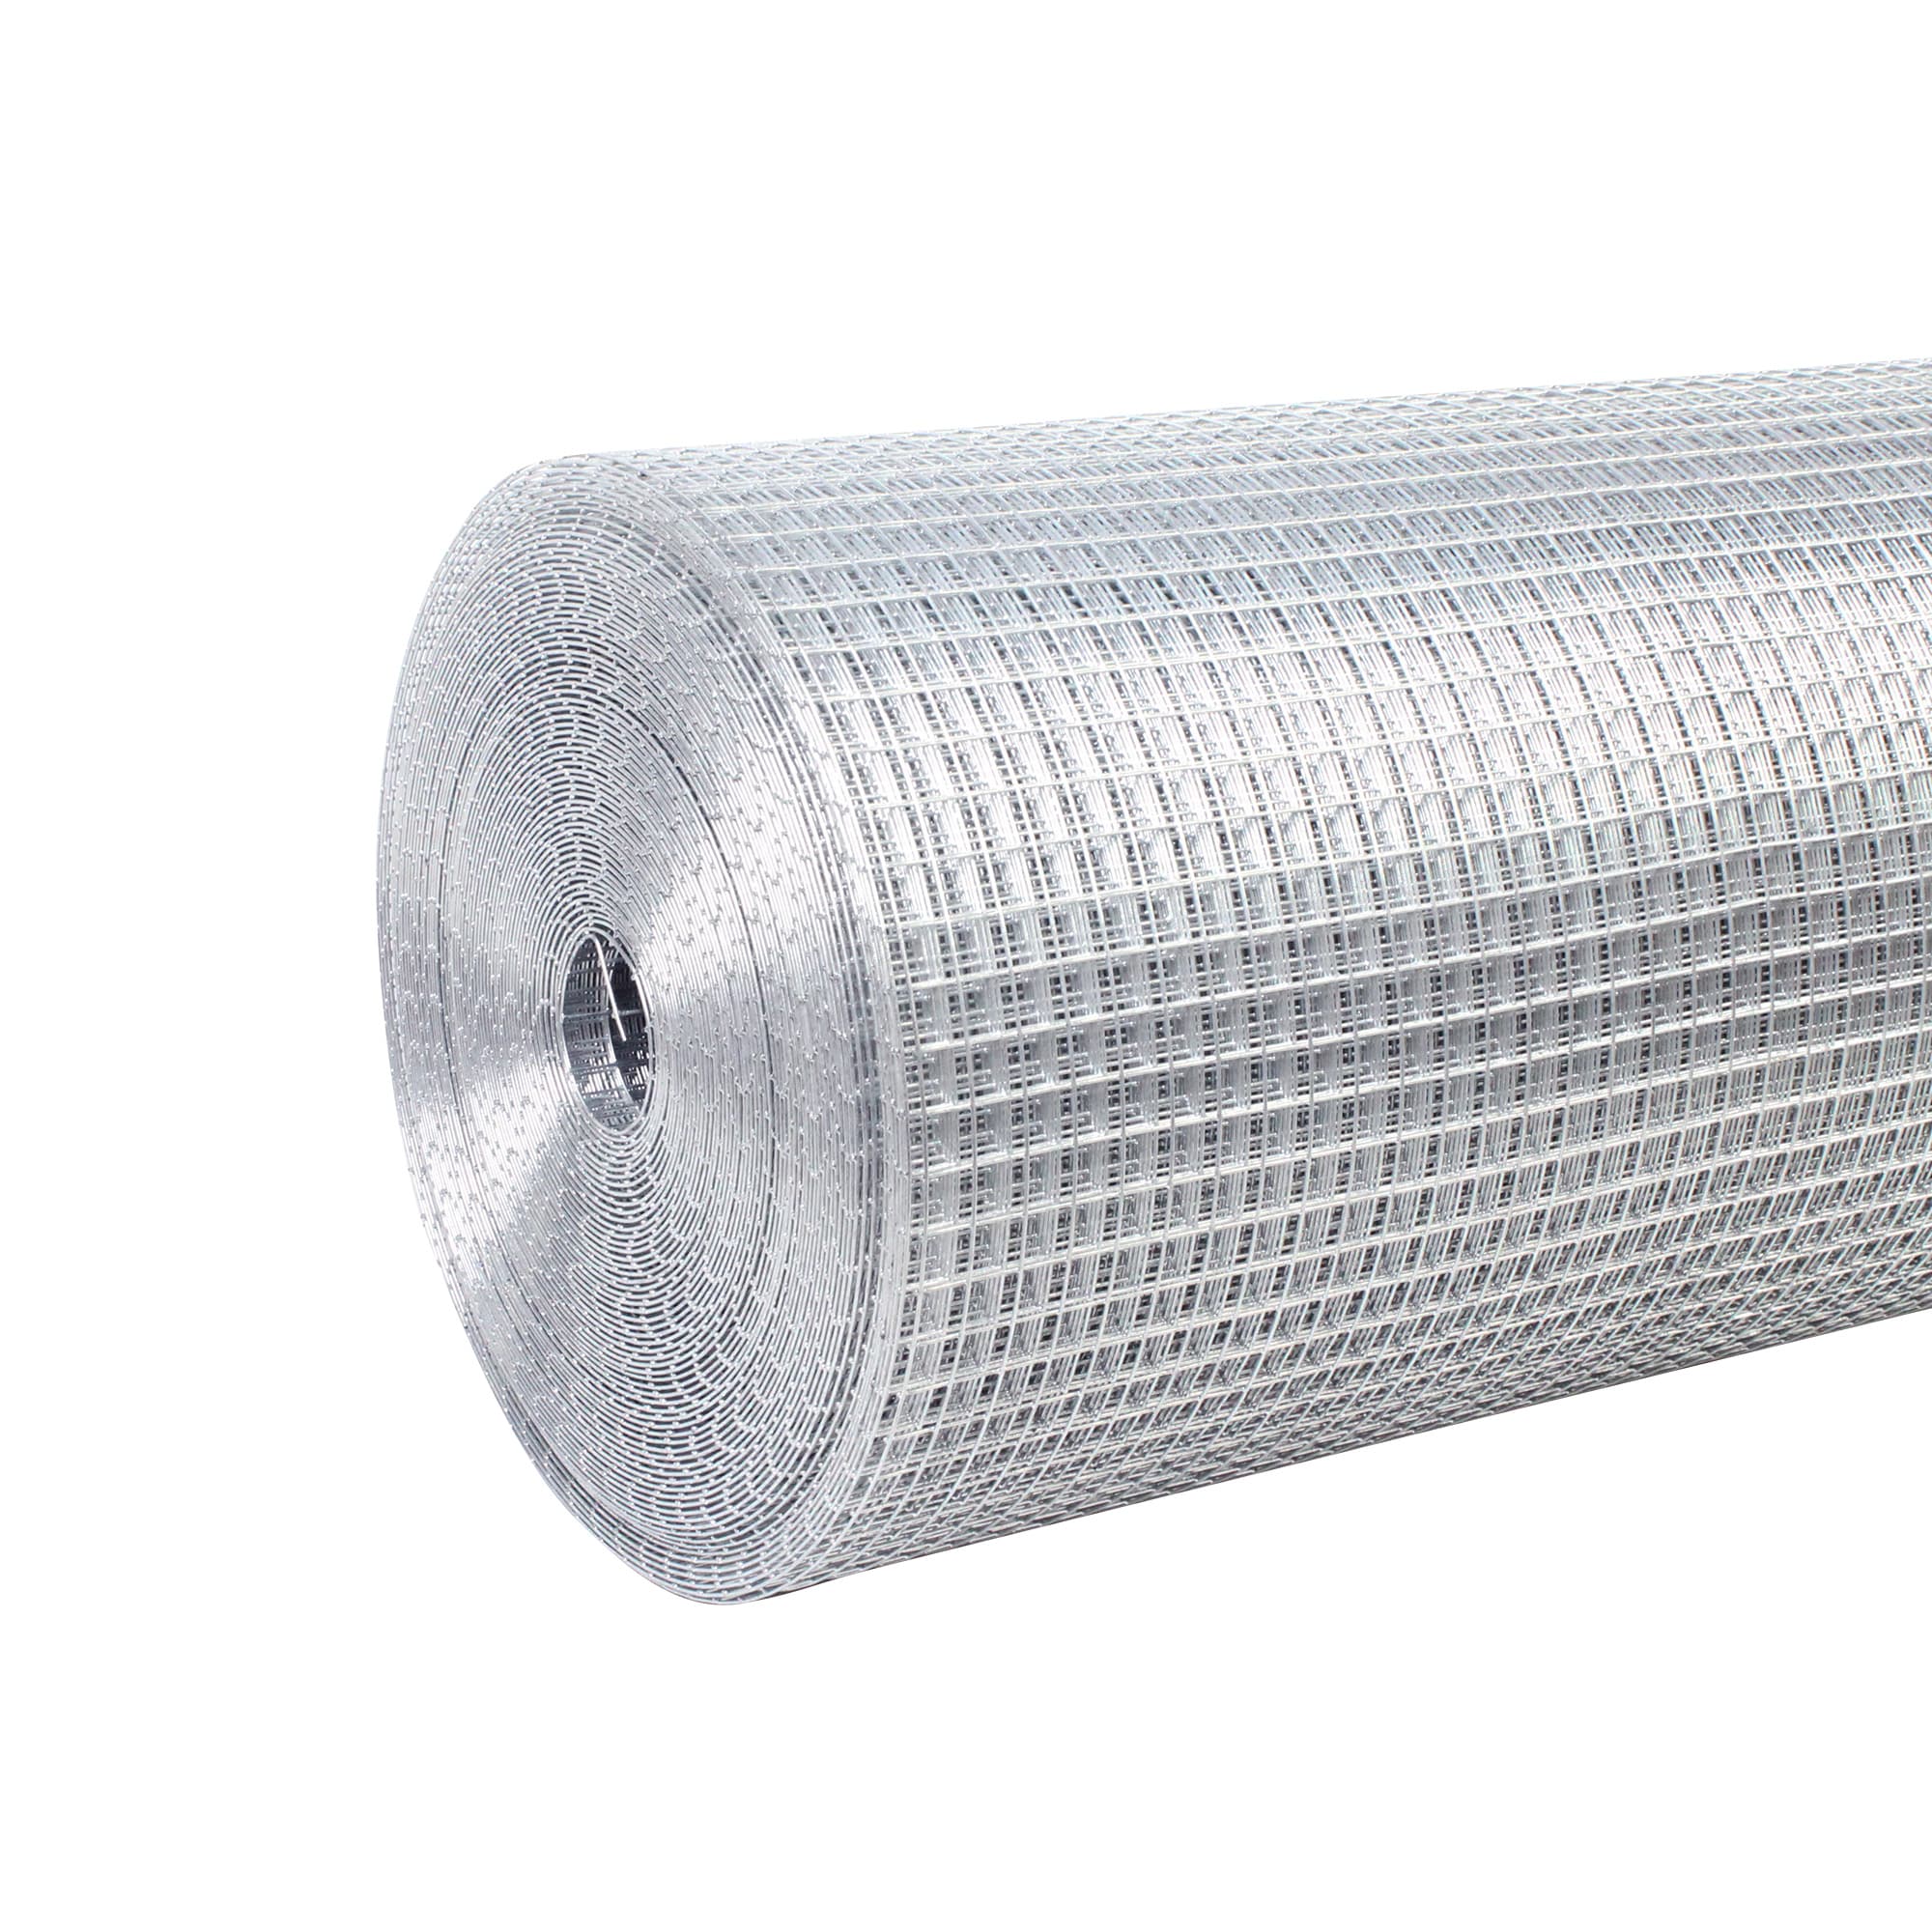 Hardware cloth Rolled Fencing at